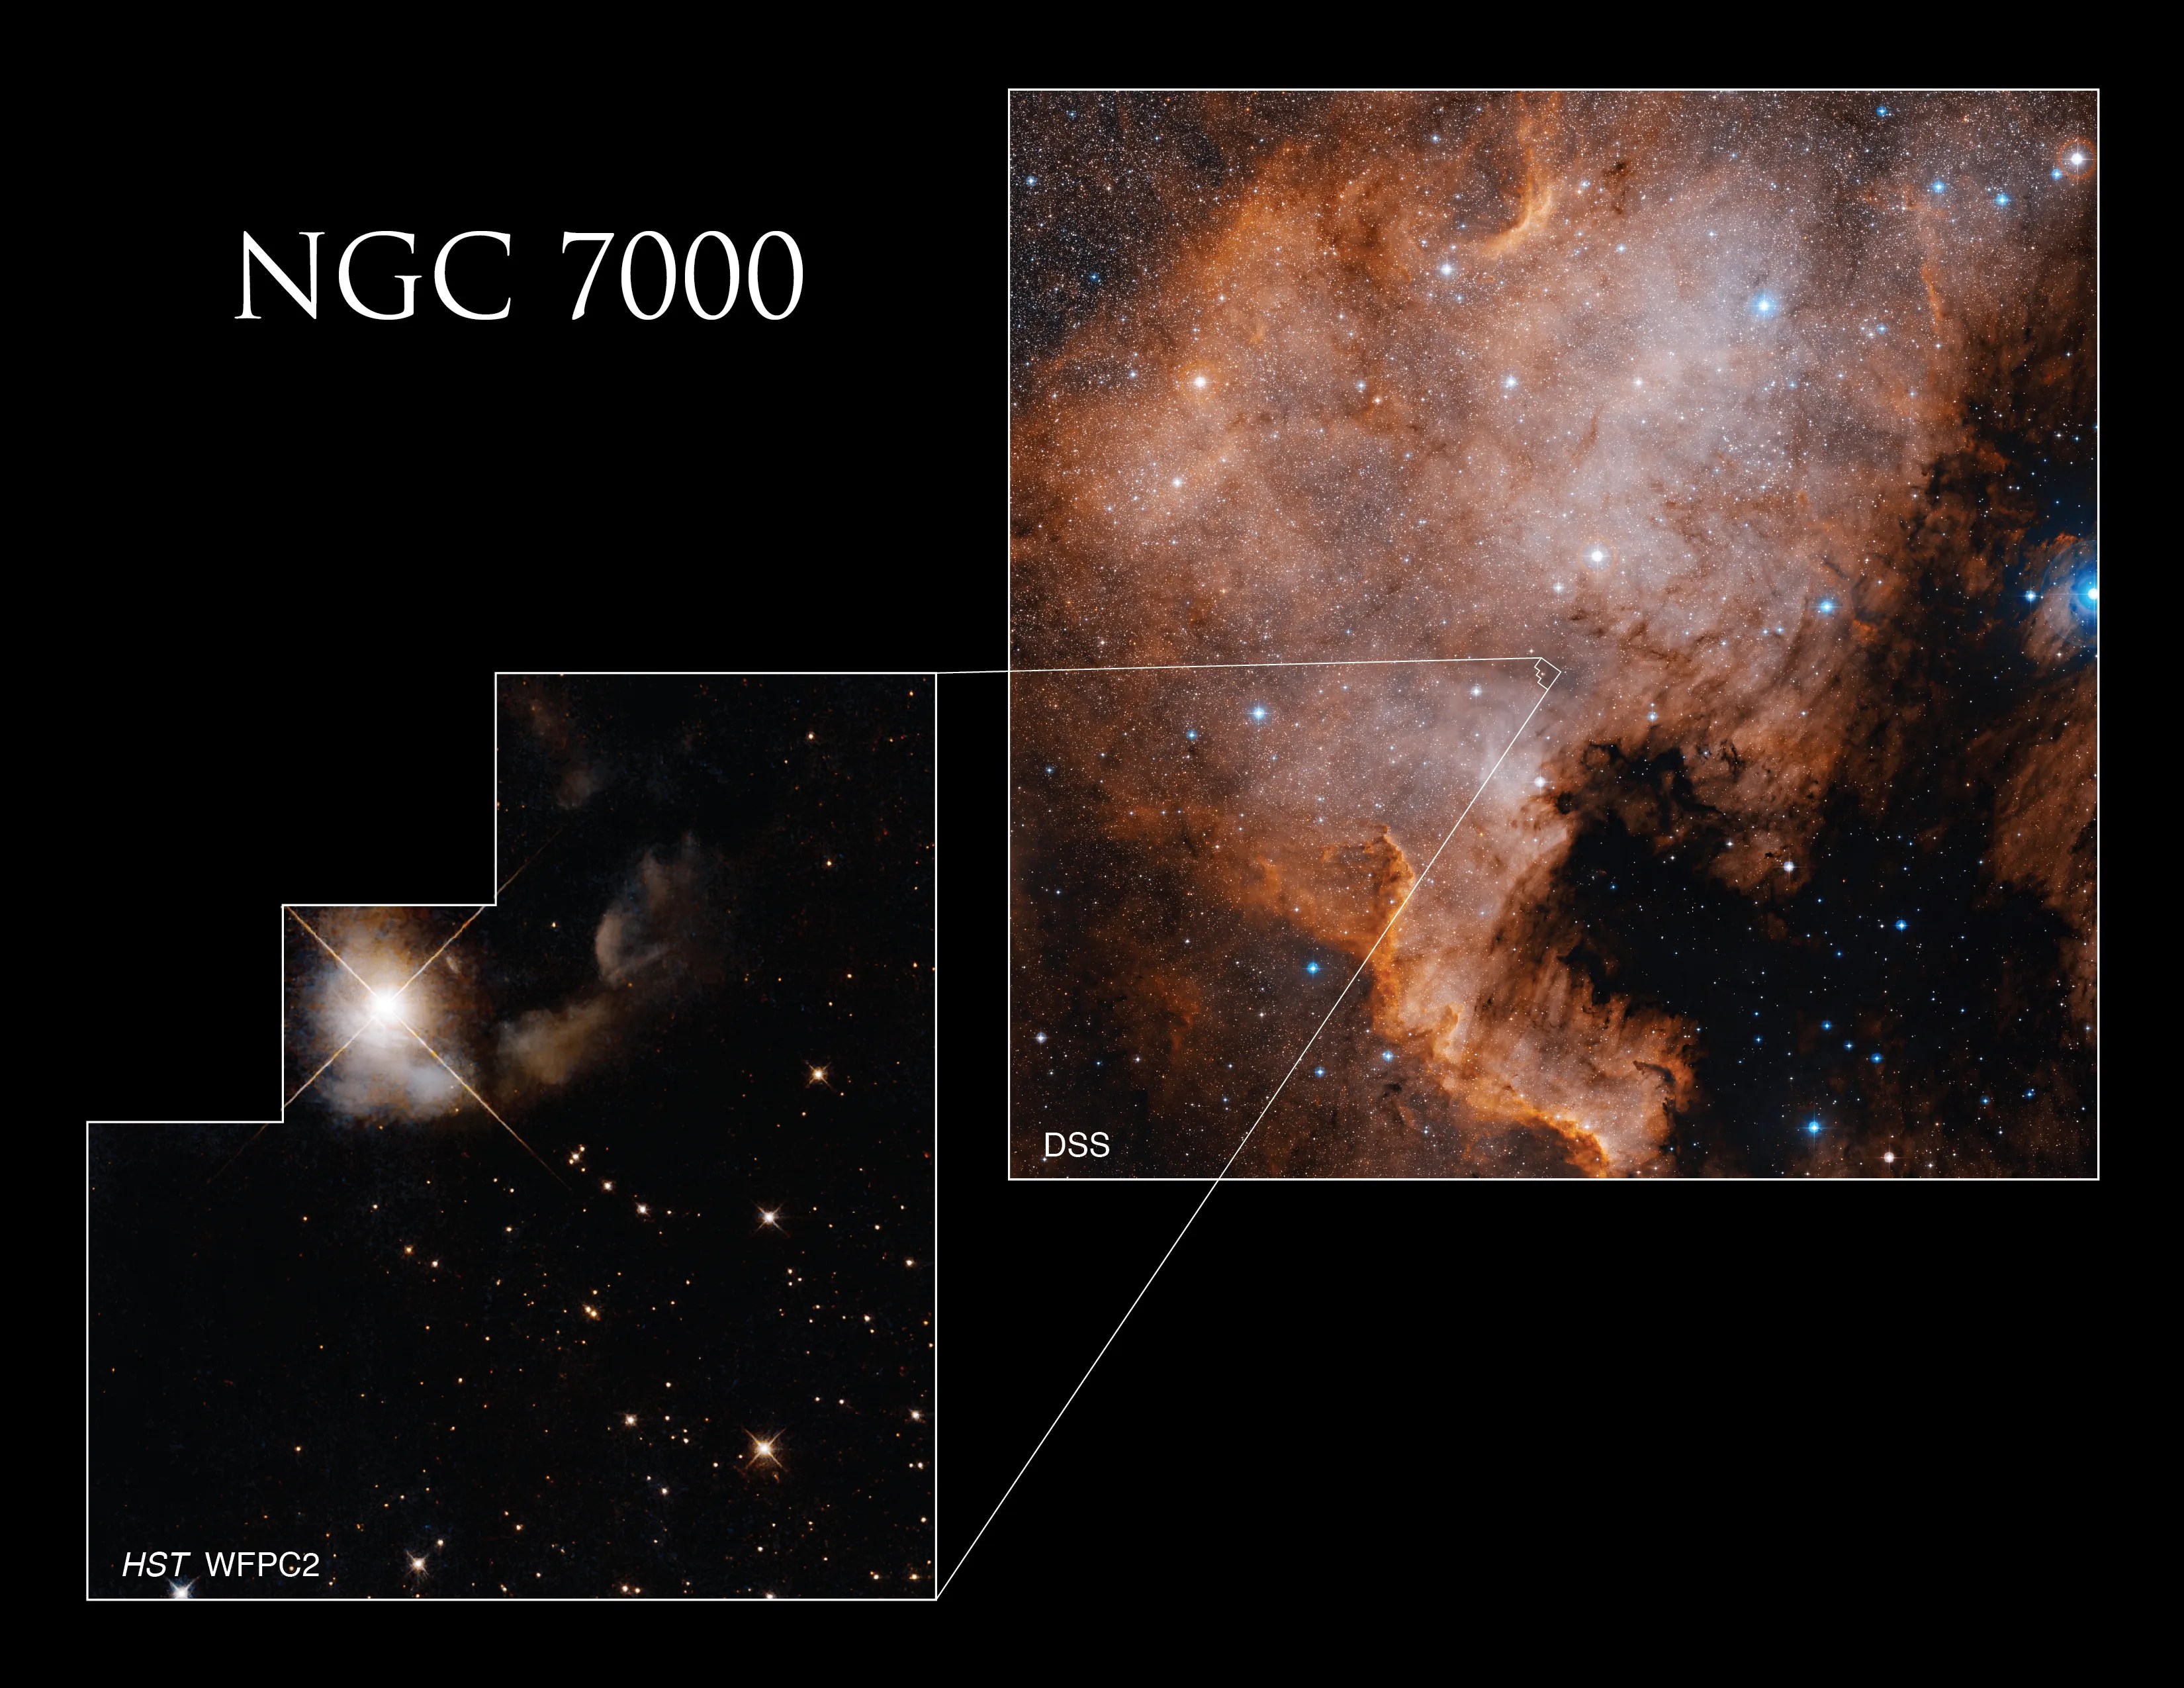 The Digitized Sky Survey (DSS) ground-based image of Caldwell 20 (NGC 7000) in the upper right captures a wide view of the nebula, illustrating why the object is known as the North America Nebula. The white outline shows the location of Hubble’s observation taken with its Wide Field and Planetary Camera 2 (WFPC2), which captures a small region of the nebula located roughly where northeastern Texas might be.